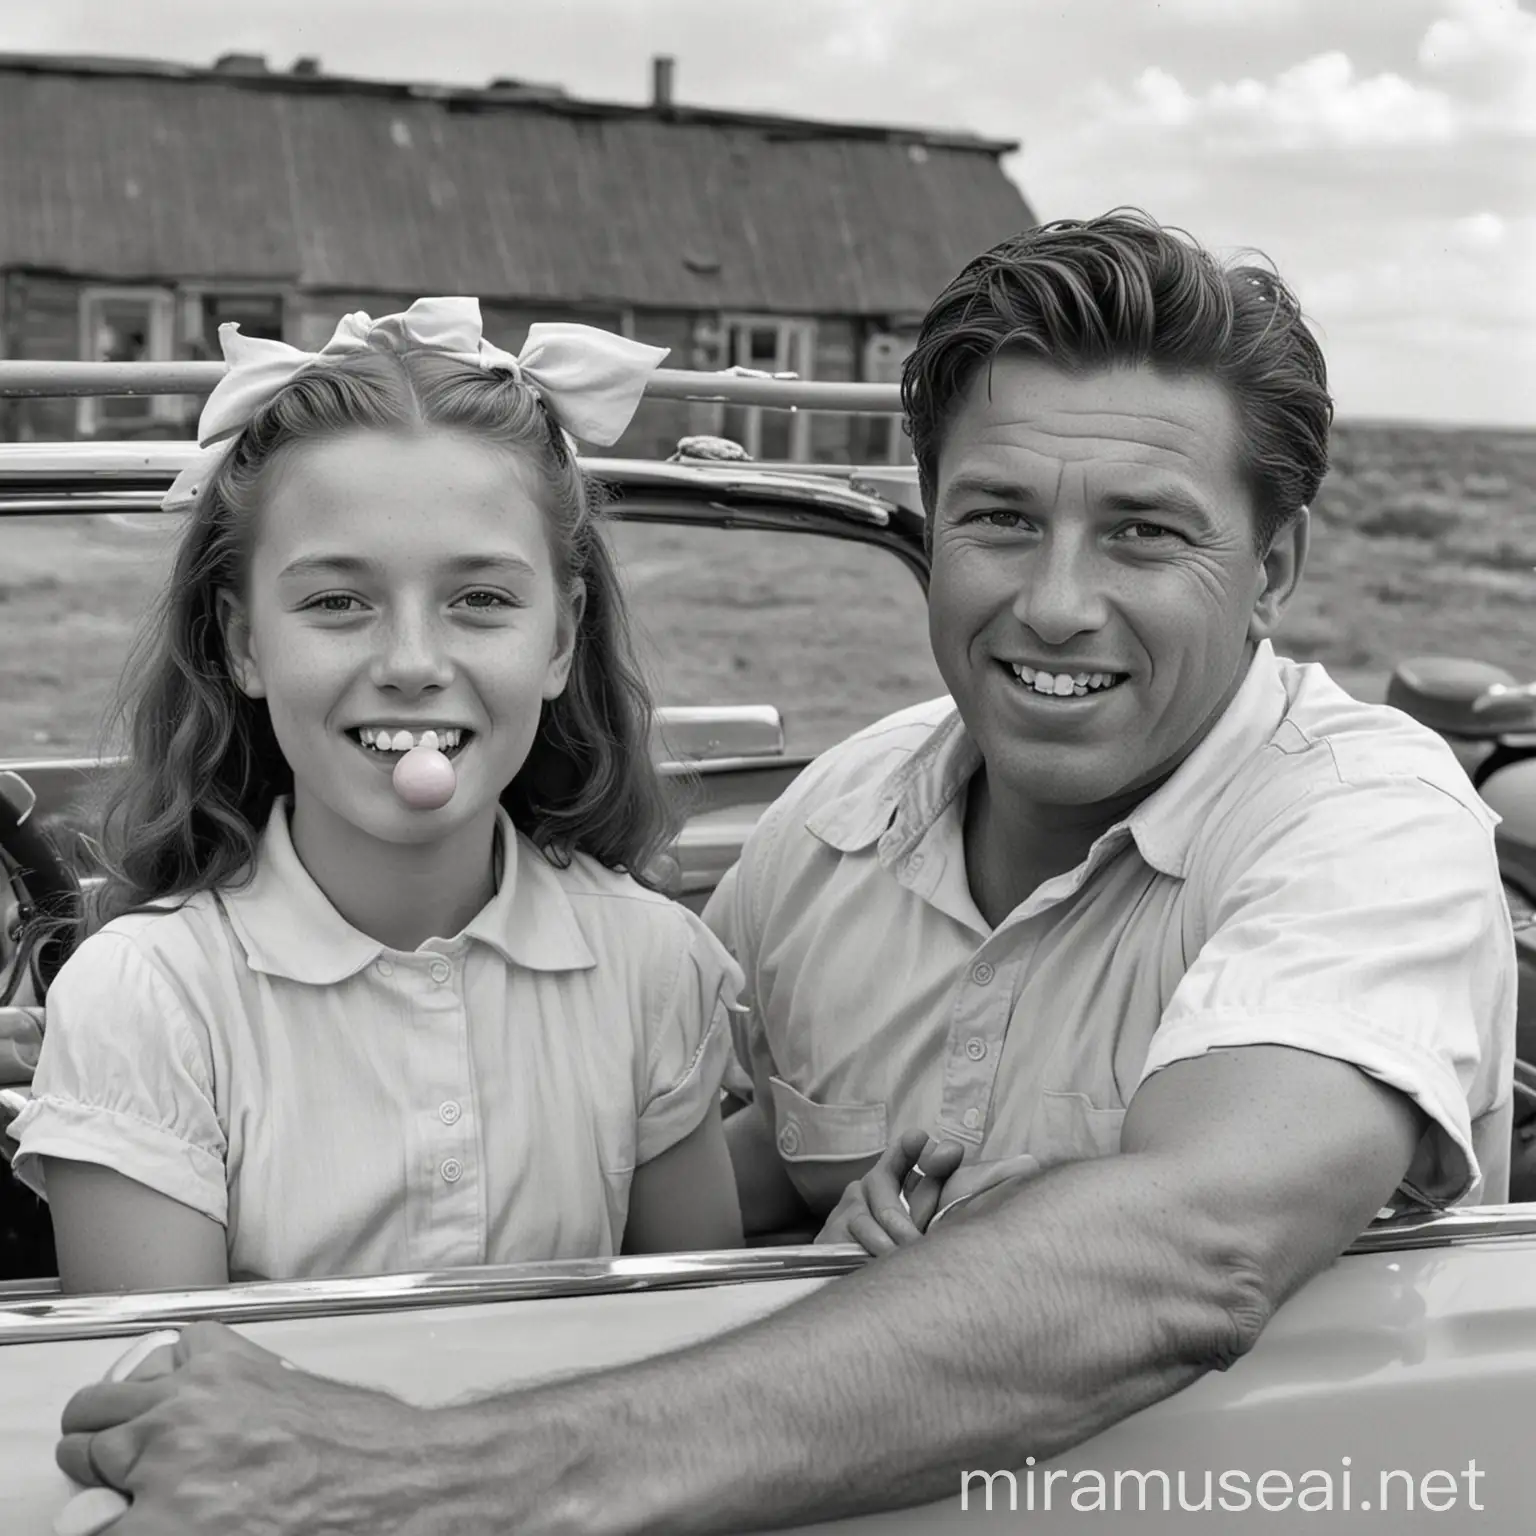 a 14-year old ginger girl chewing a bubblegum sitting nexto to her middle aged handsome father who is driving a white jeep across America in 1949